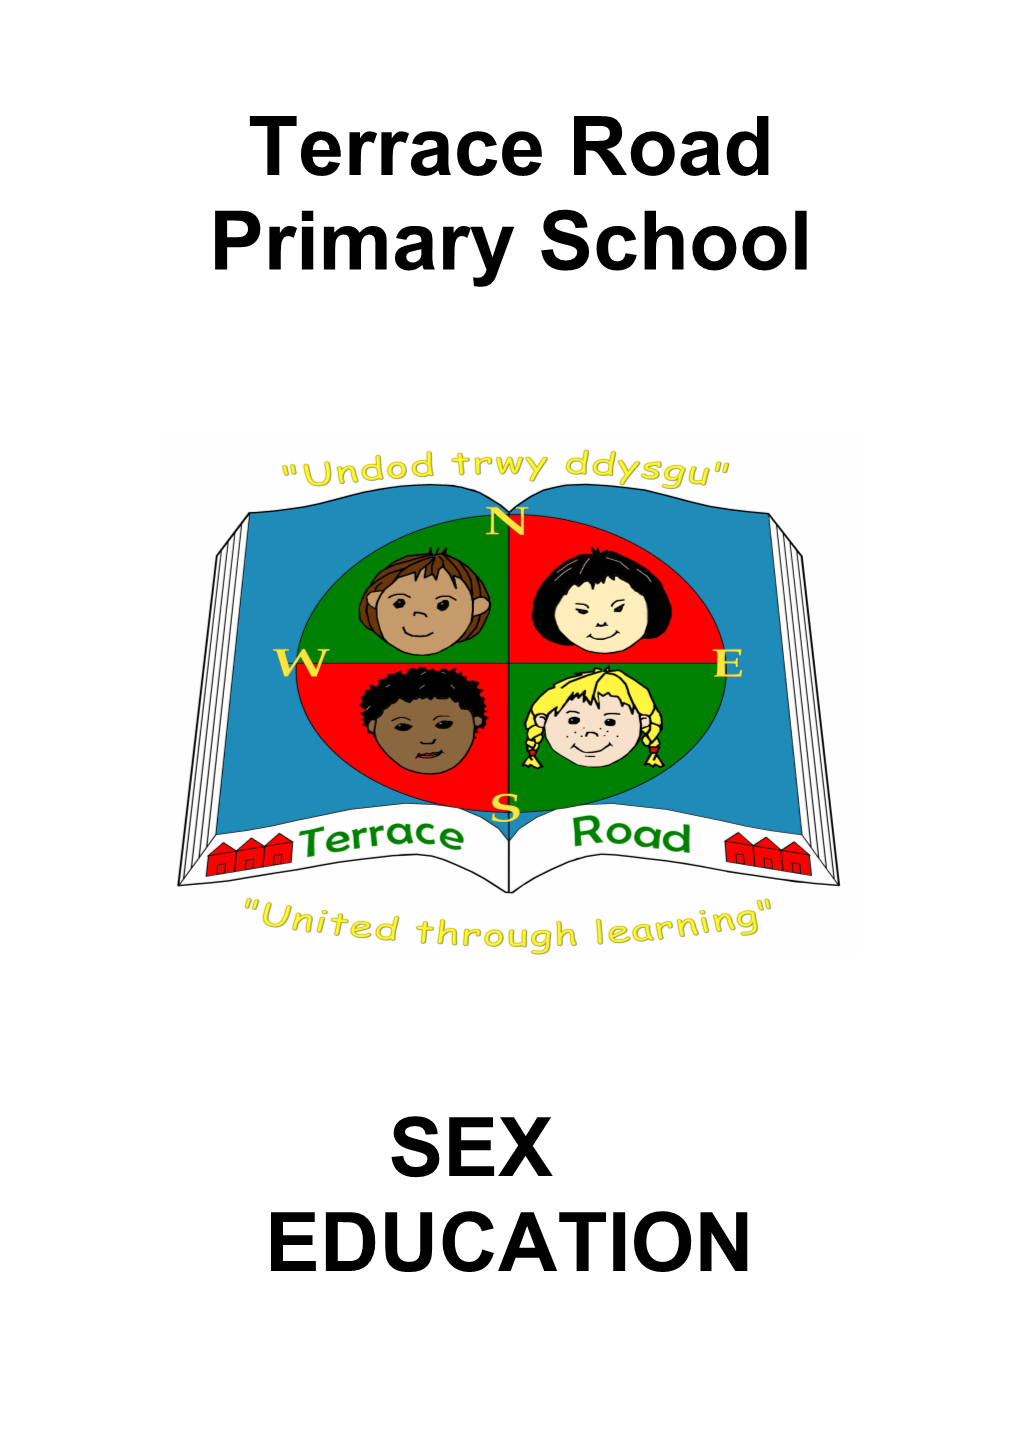 Sex Education Policy